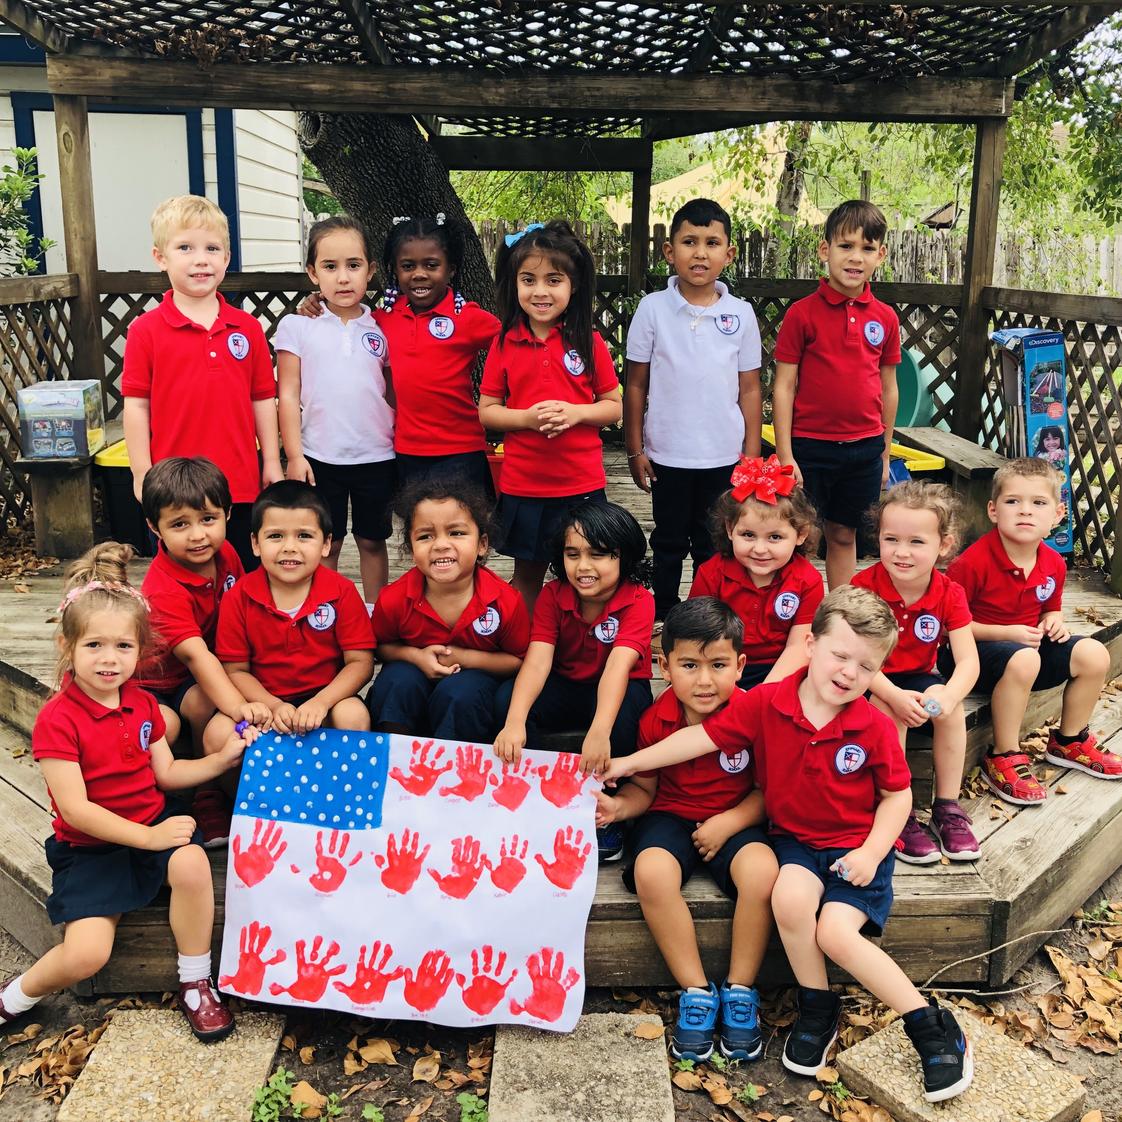 Epiphany Episcopal School Photo - Epiphany students showing off their hand-made U.S. Flag in observance of Veteran's Day.